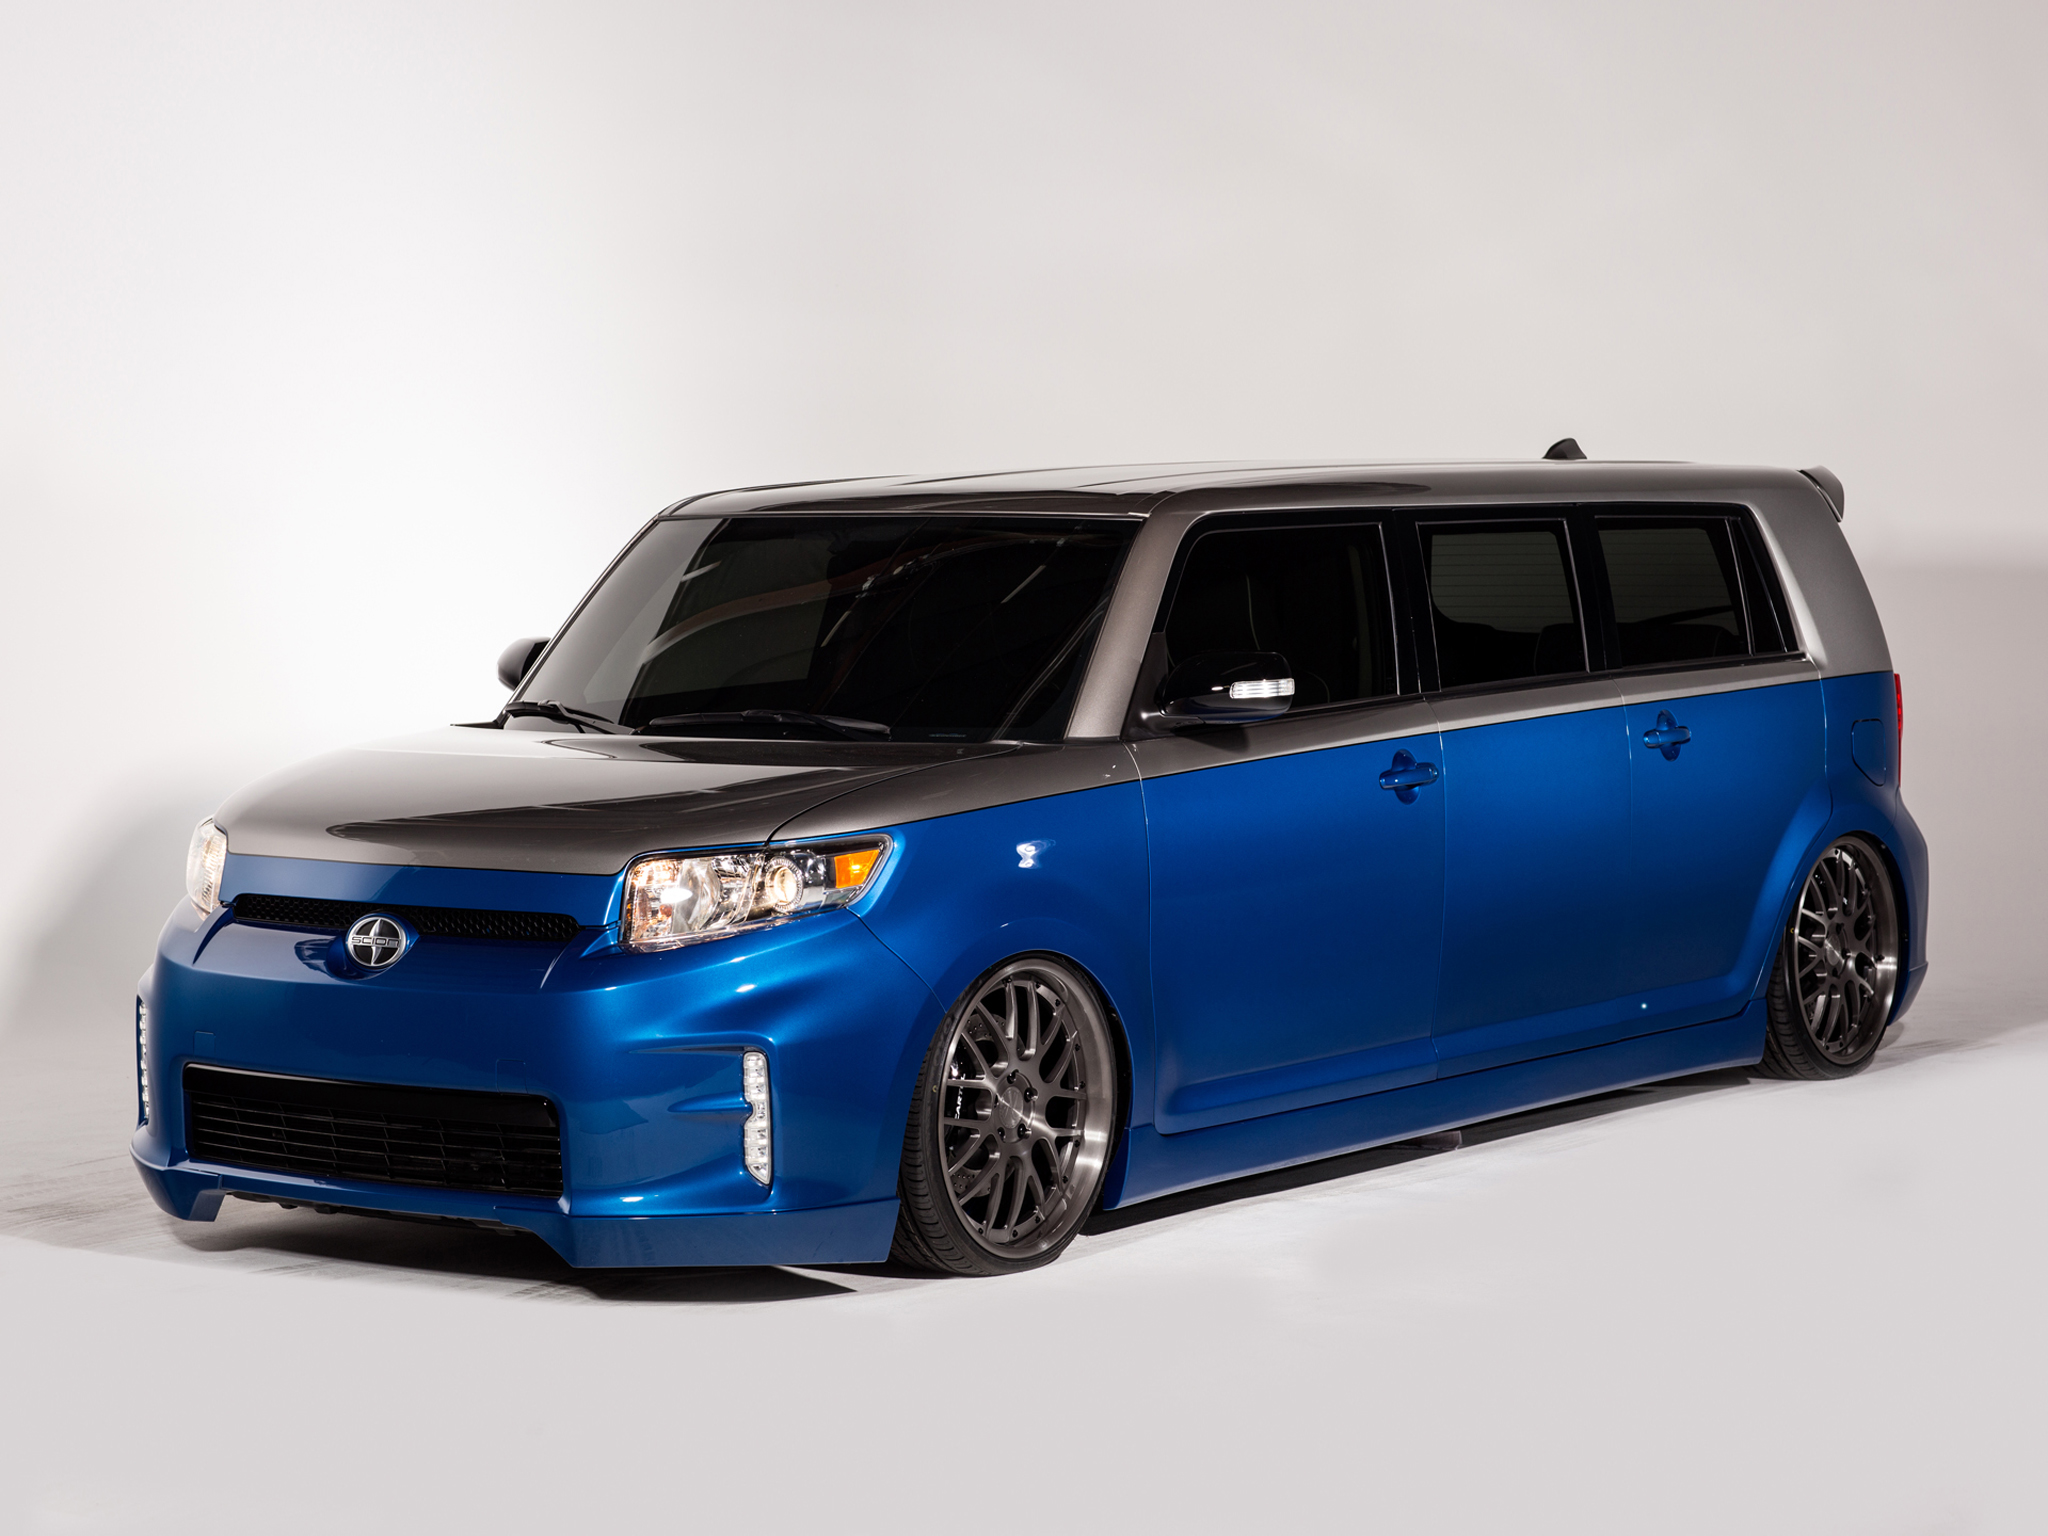 2014, Scion, Xb, Strictly, Business, Cartel, Limousine, Tuning Wallpaper